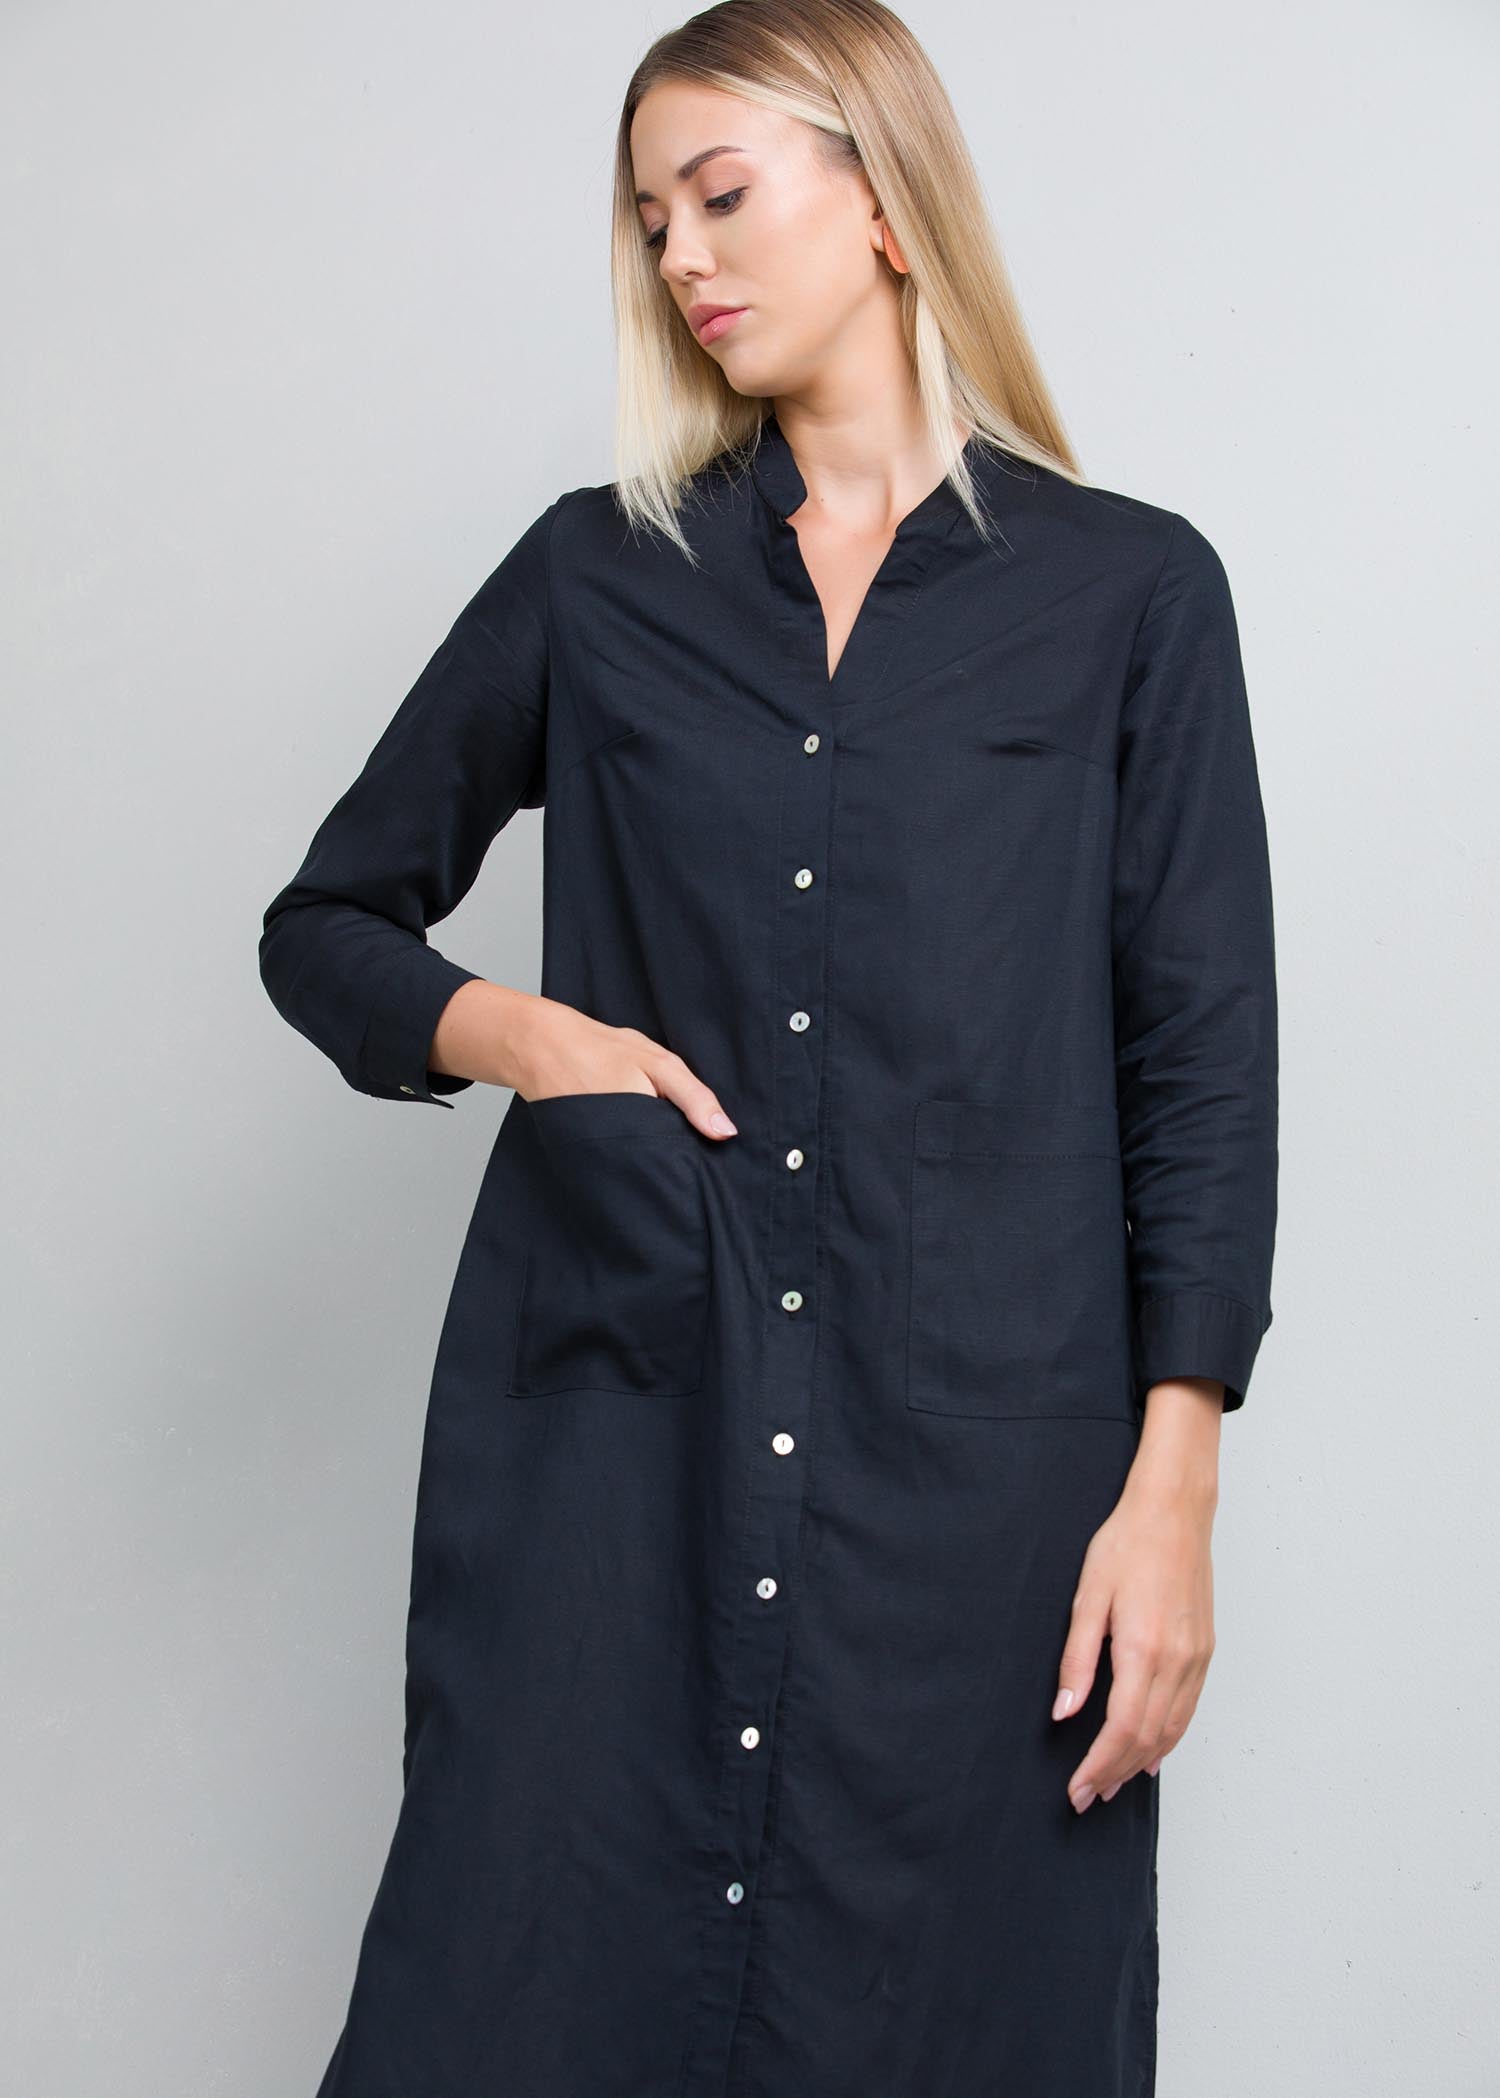 Button down dress with pockets